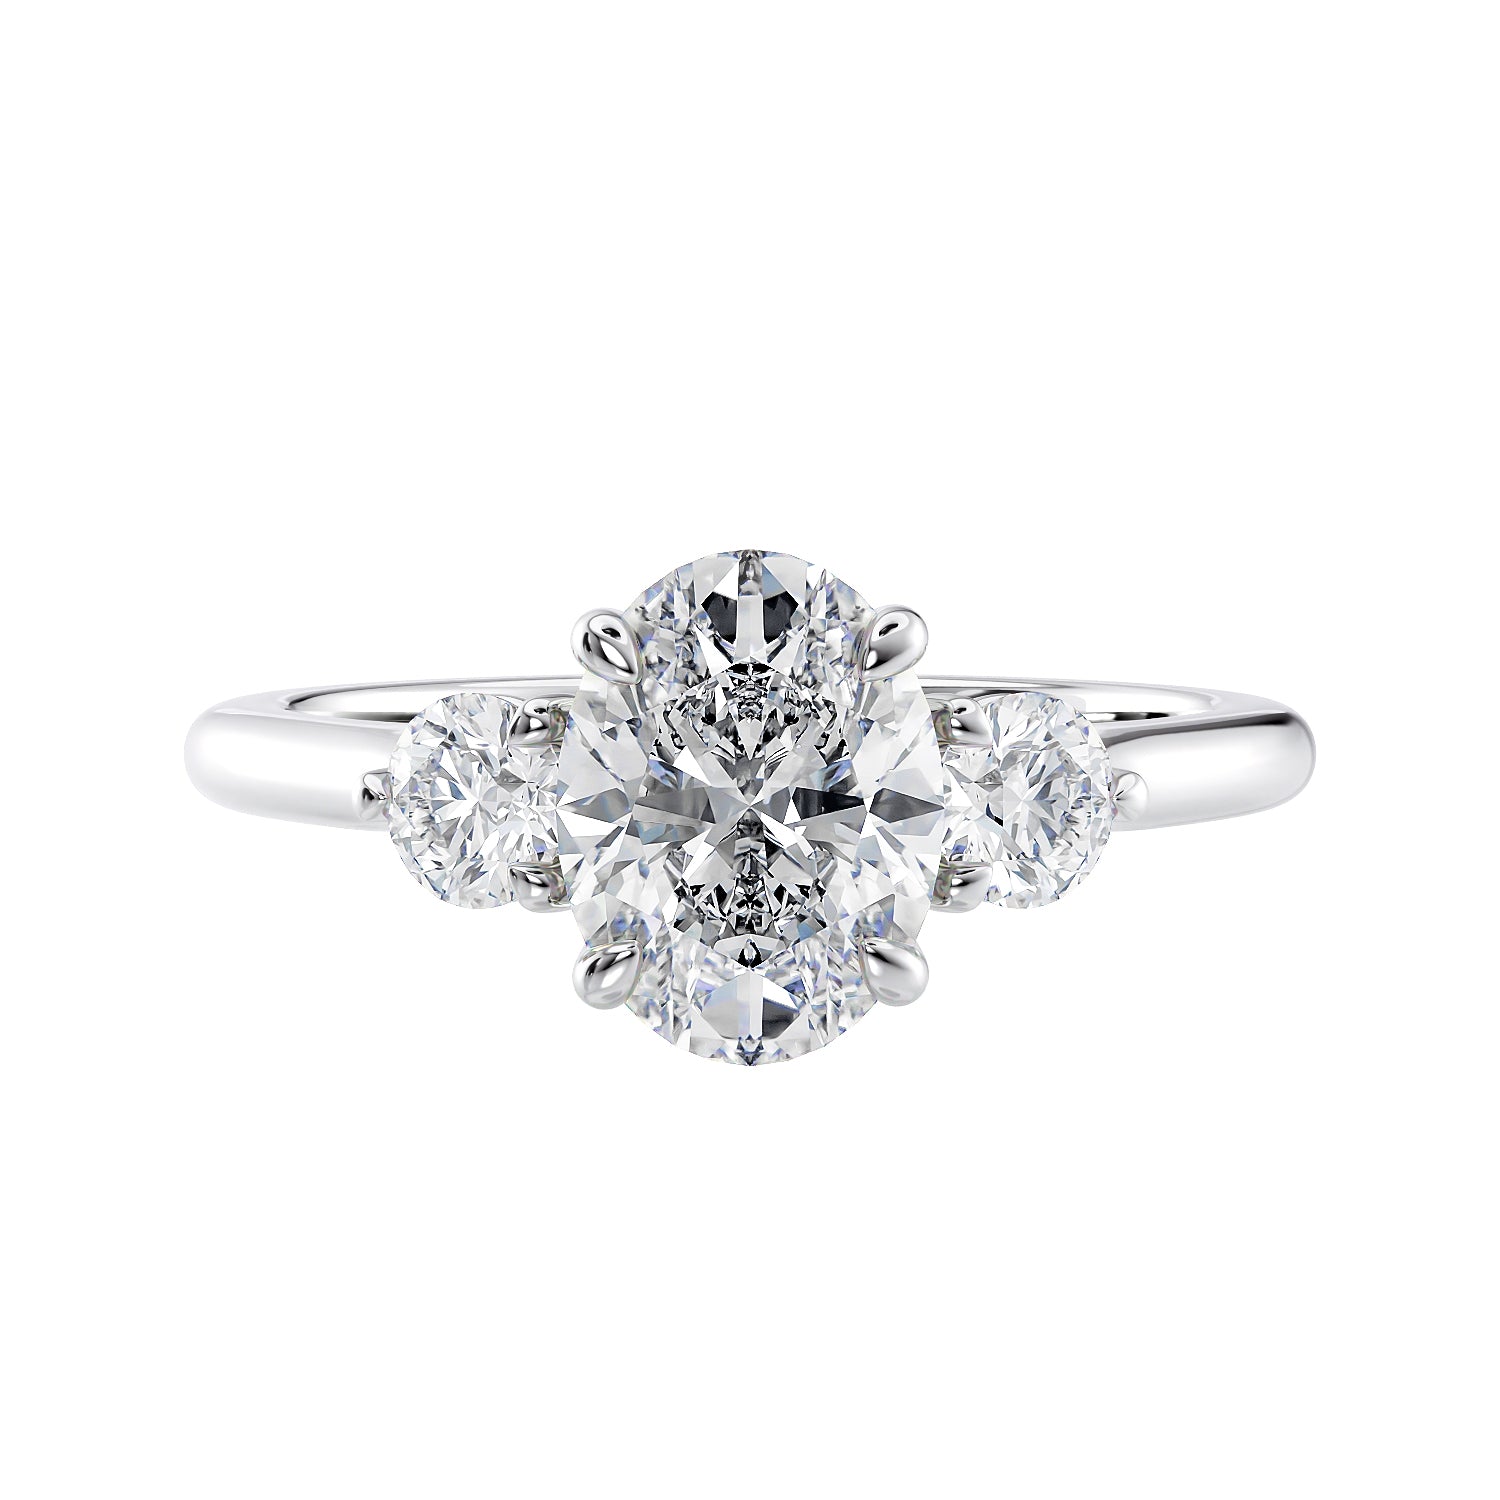 Oval diamond 3 stone engagement ring with small side diamonds 18ct white gold front view.